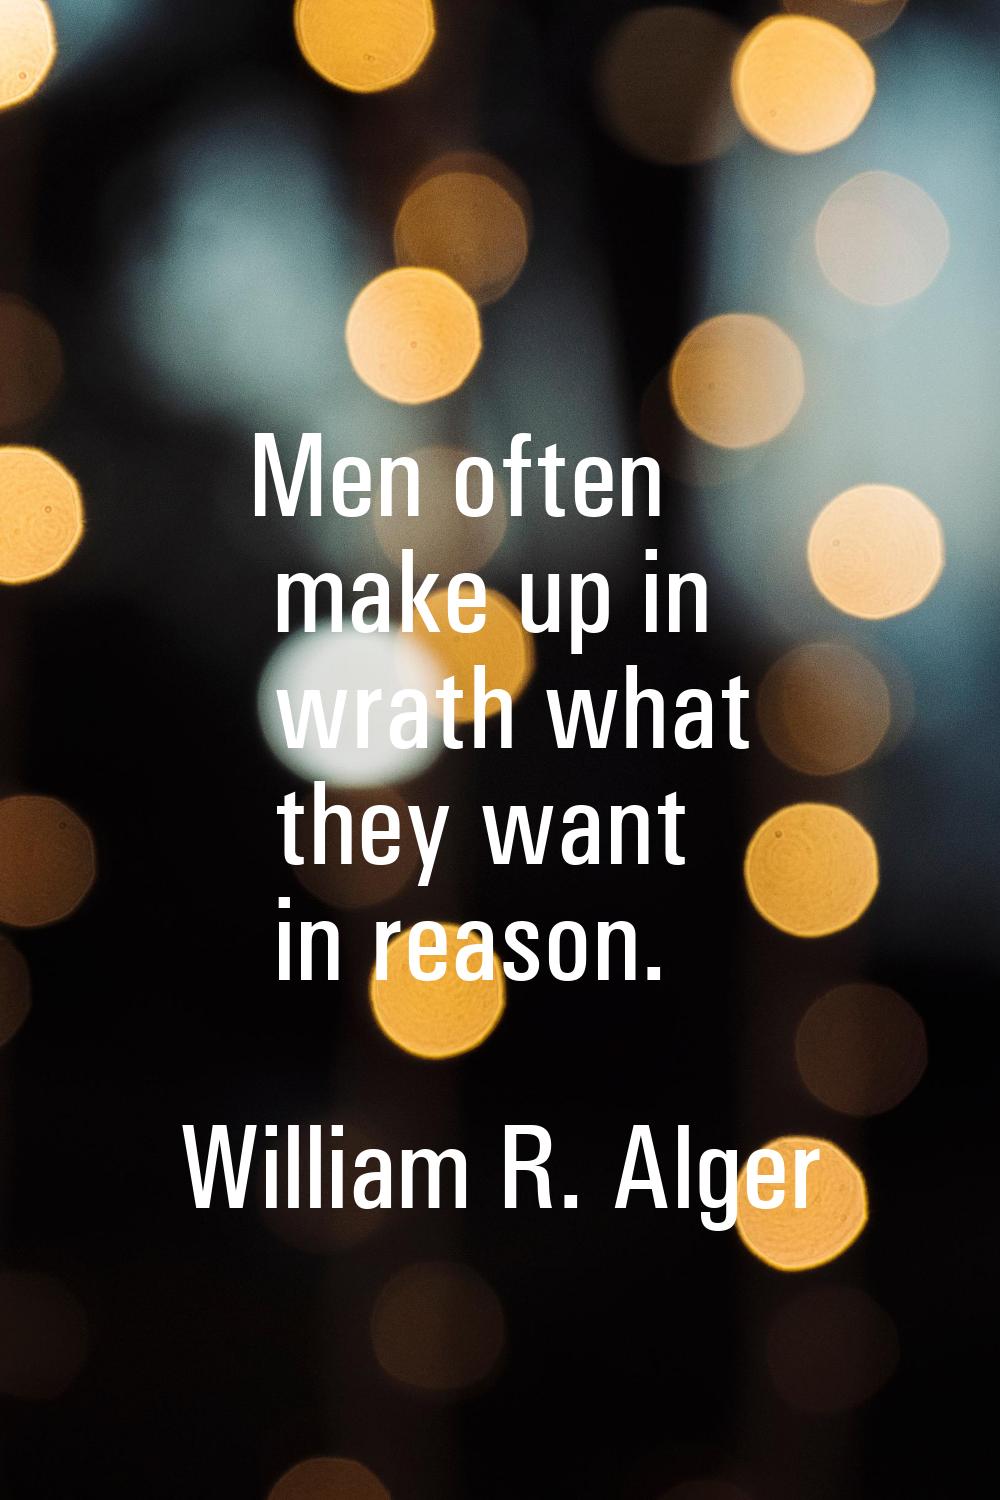 Men often make up in wrath what they want in reason.